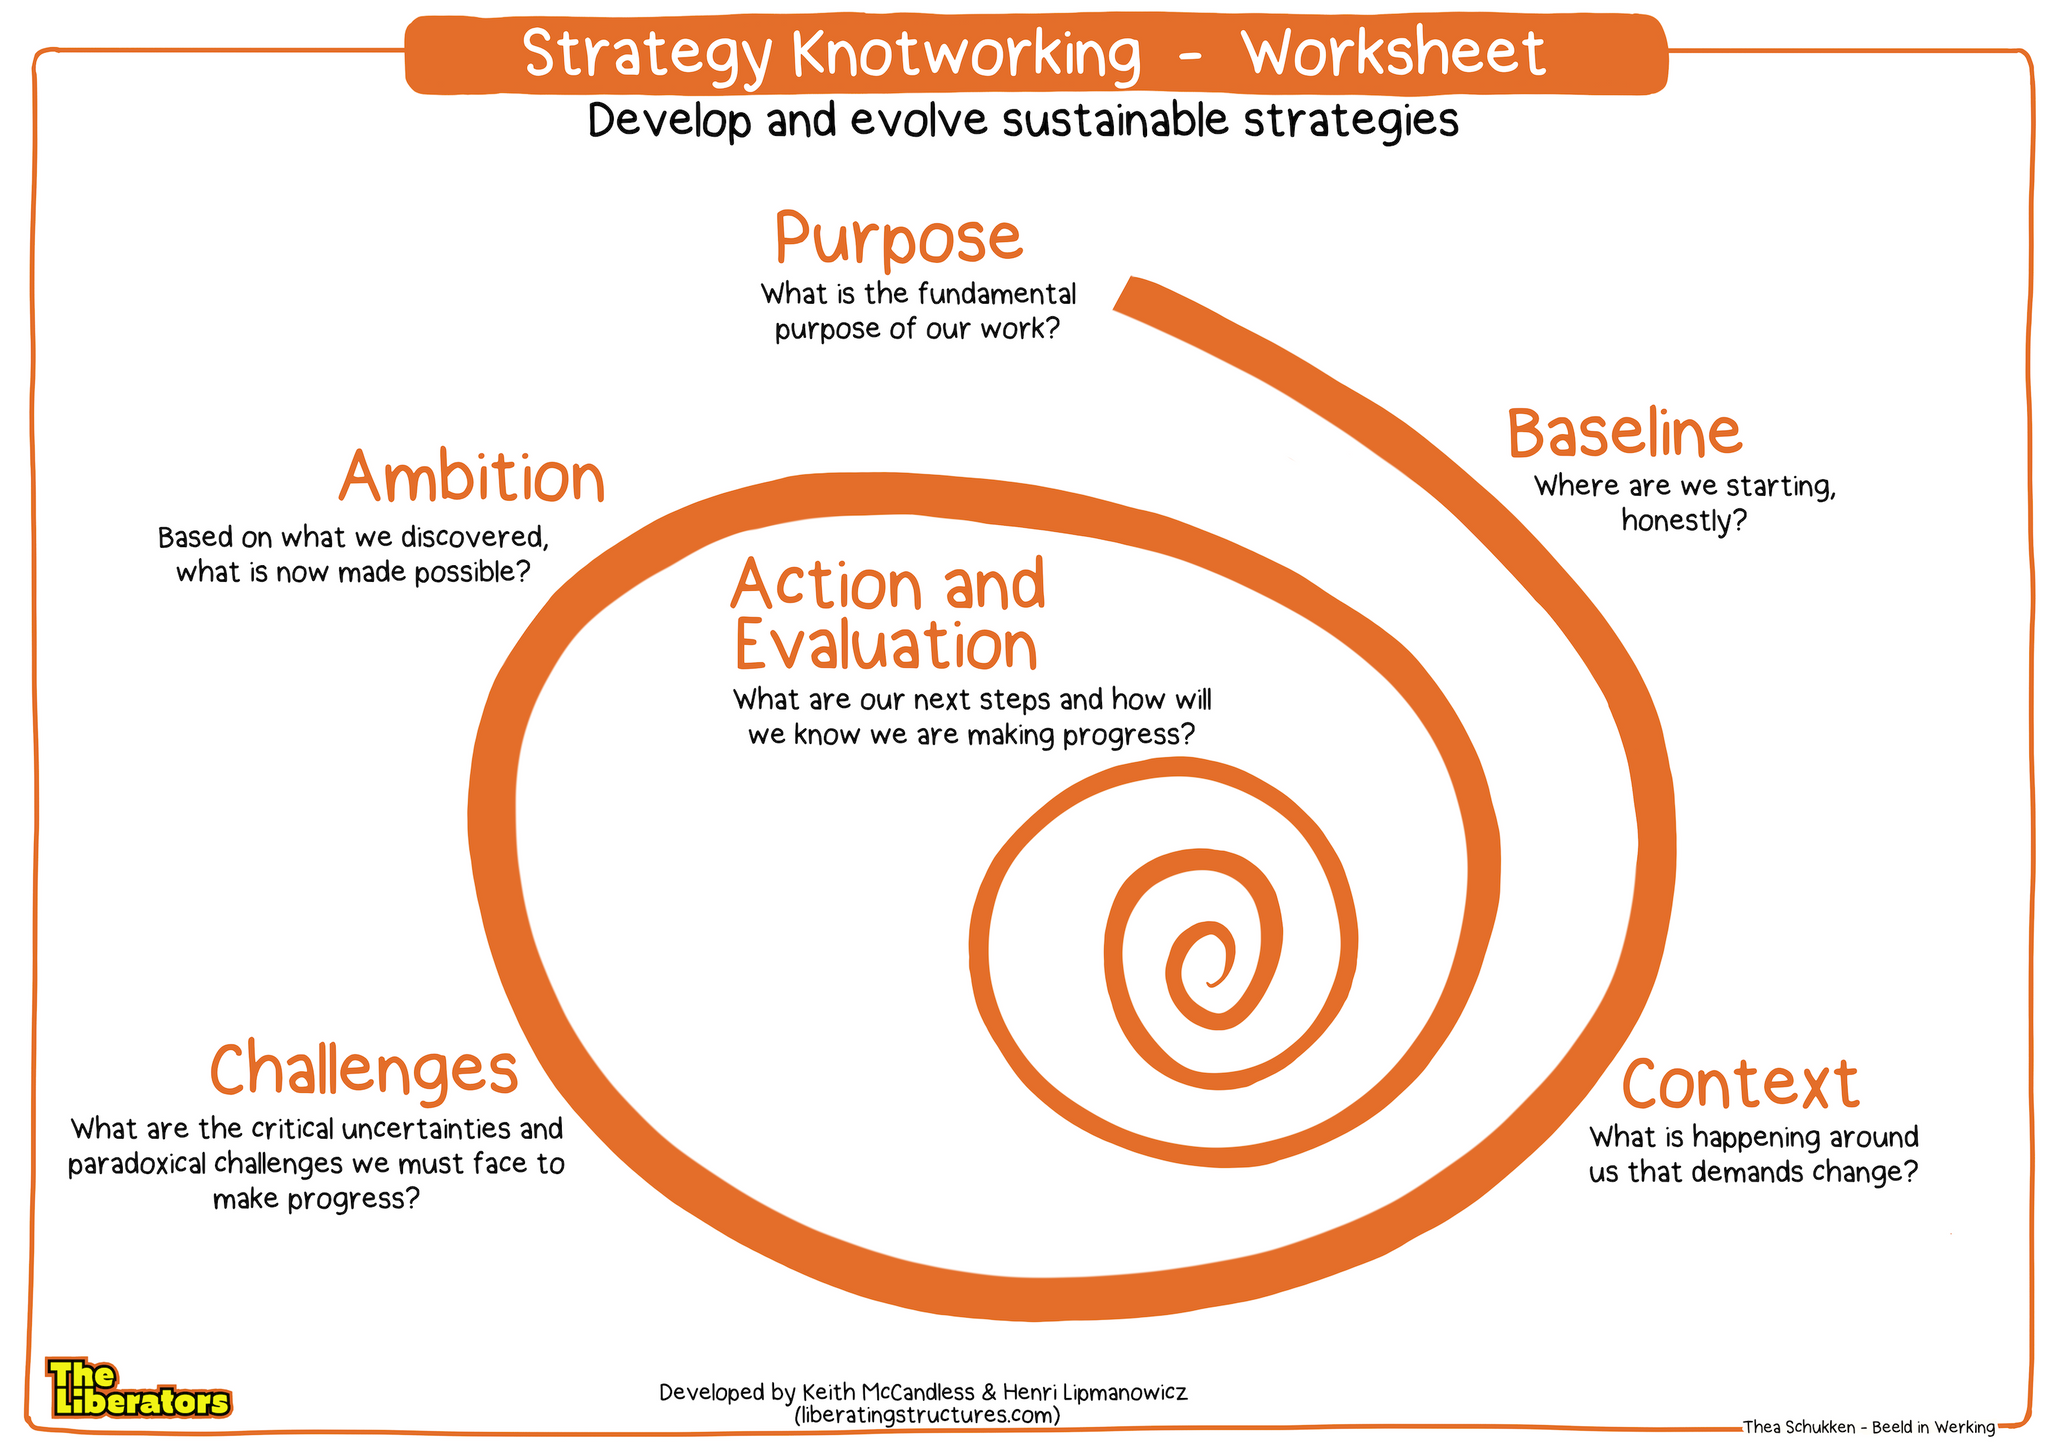 poster-strategyknotworking-worksheetsmall_1024x1024402x